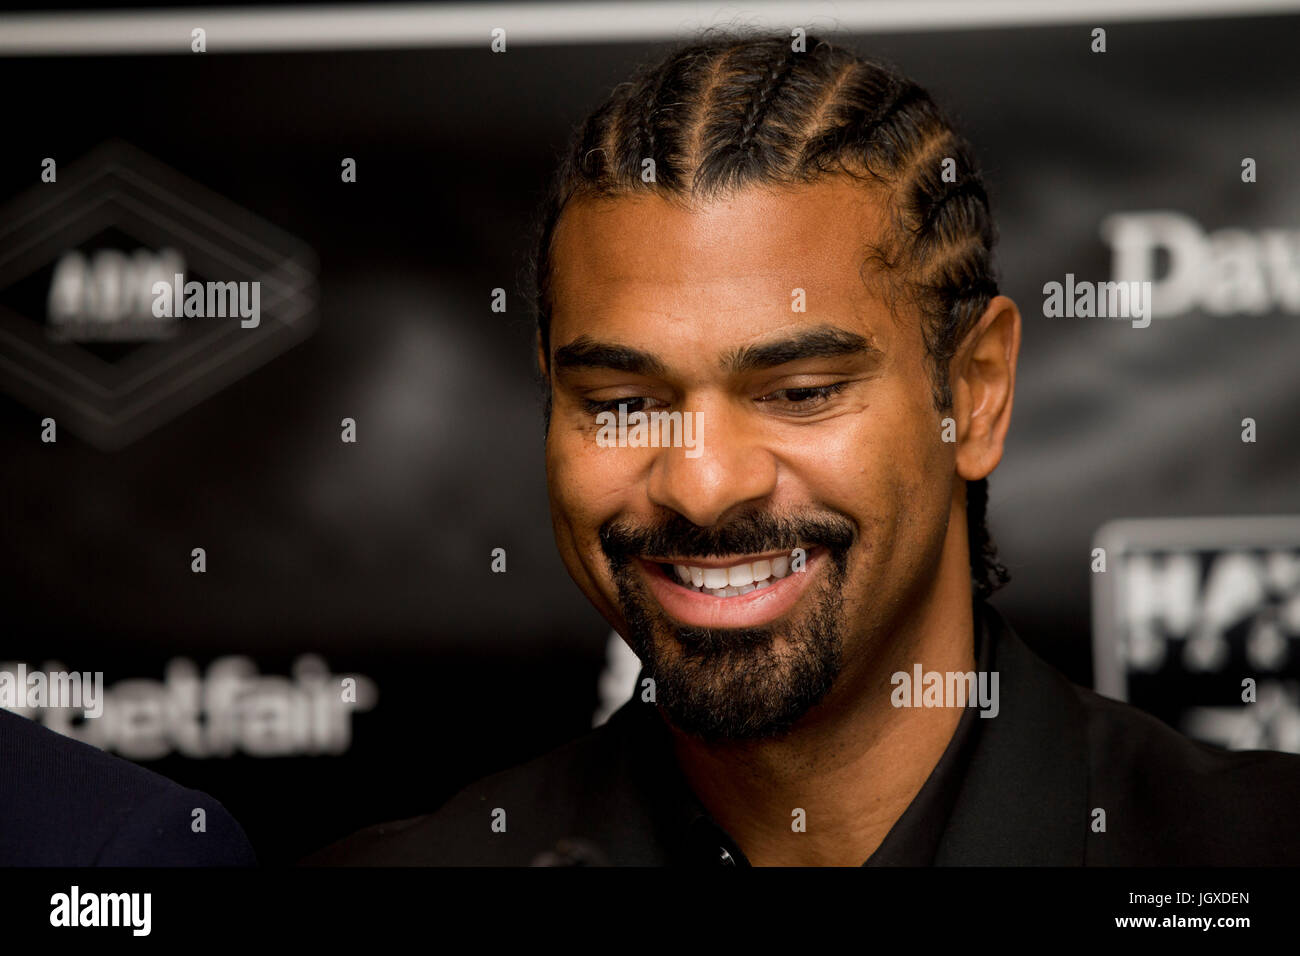 London, UK. 12 July 2017. British boxer, who's won the major world cruiserweight titles and The World Boxing Association (WBA) World Heavyweight Championship, appears at press conference to discuss his return to boxing. Credit: Sebastian Remme/Alamy Live News Stock Photo